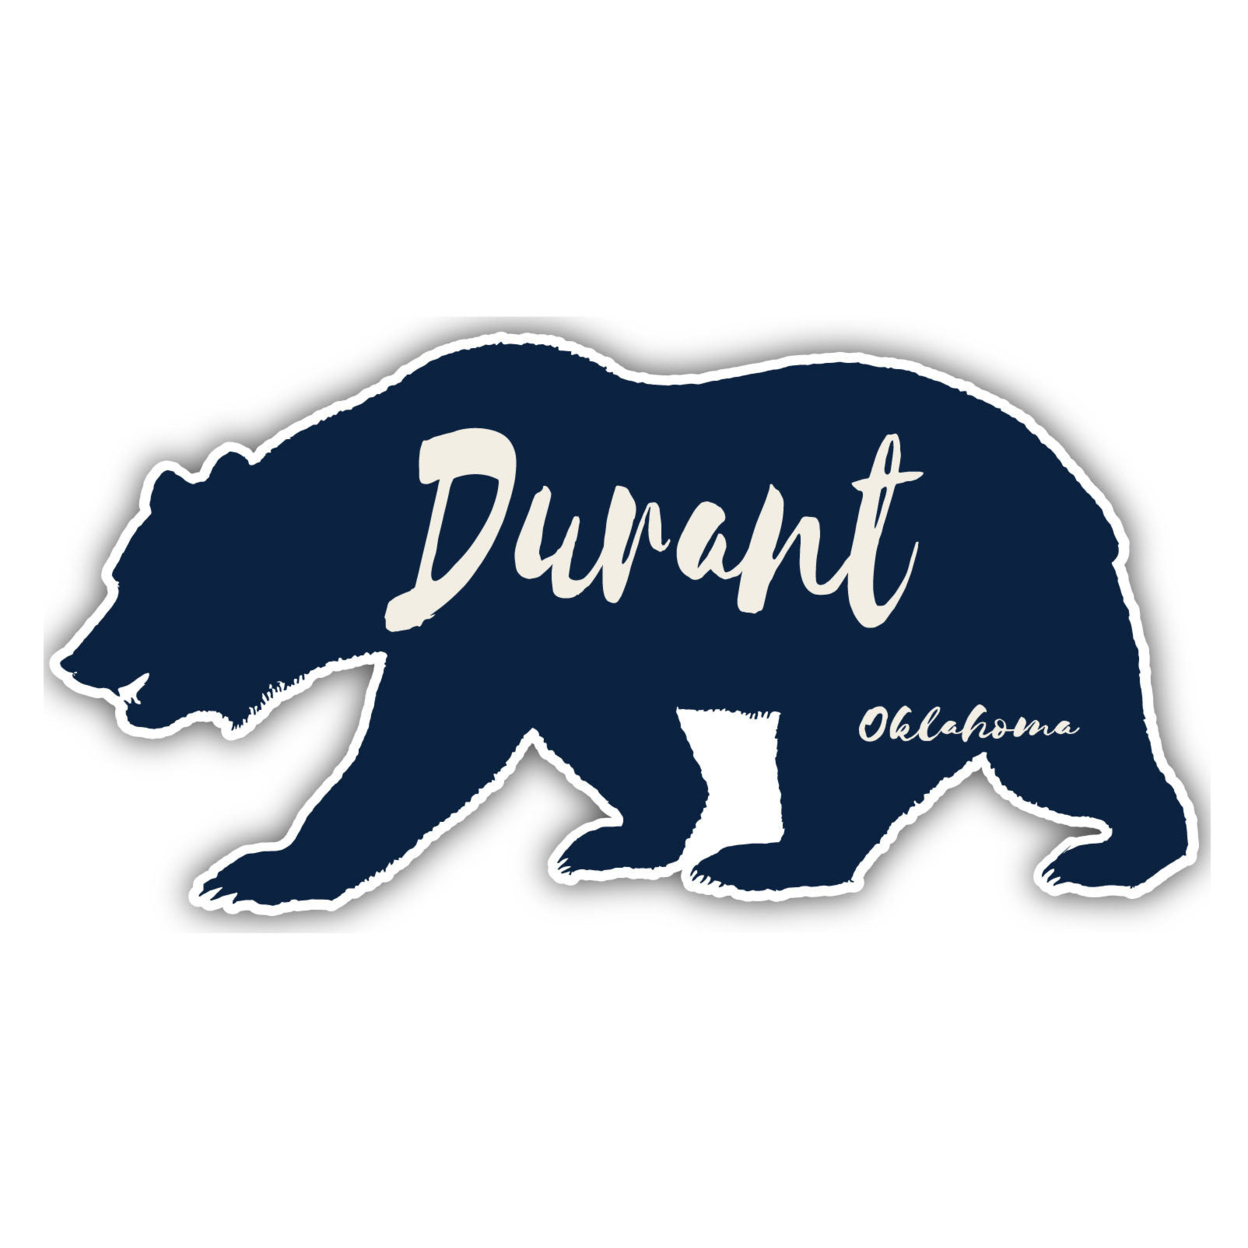 Durant Oklahoma Souvenir Decorative Stickers (Choose Theme And Size) - 4-Pack, 12-Inch, Camp Life